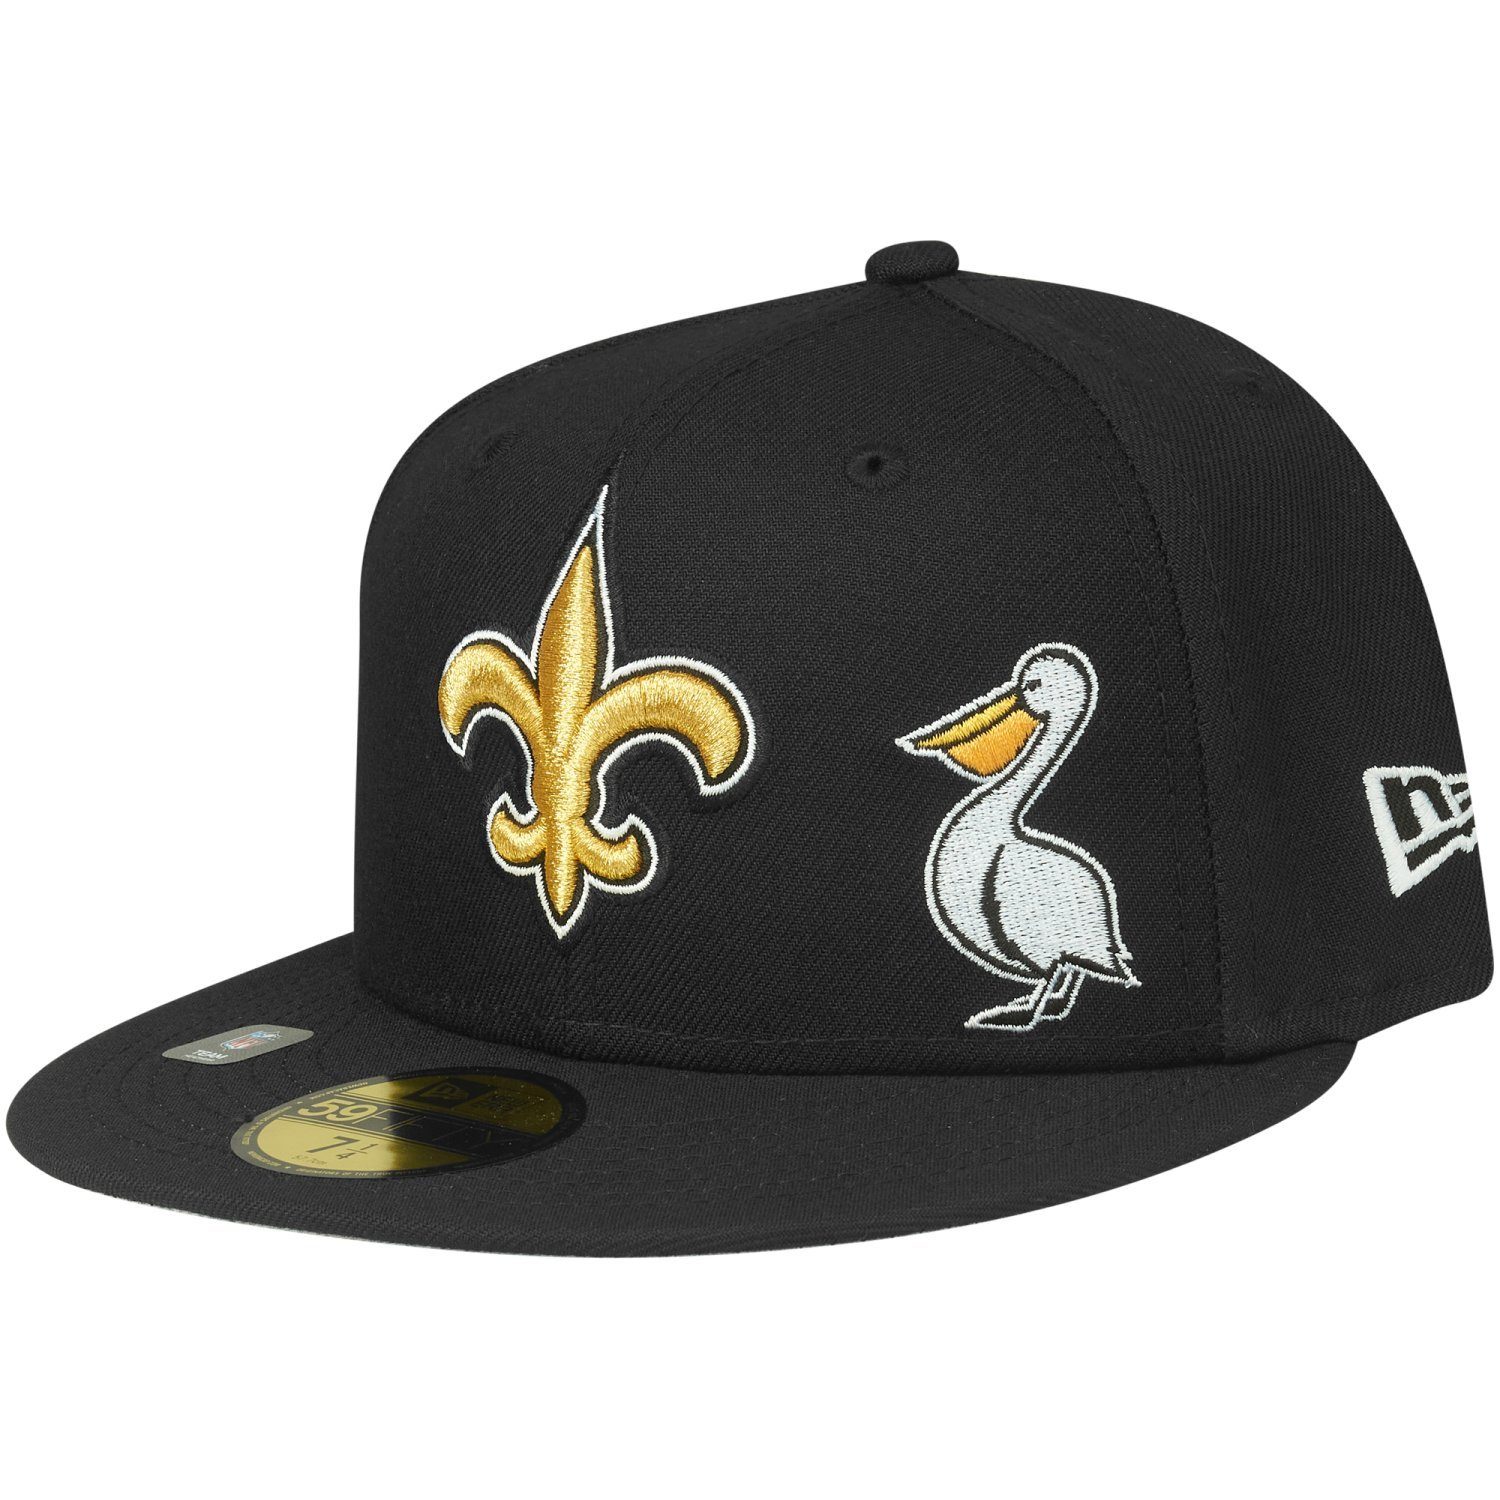 New Era Fitted Cap 59Fifty NFL CITY New Orleans Saints